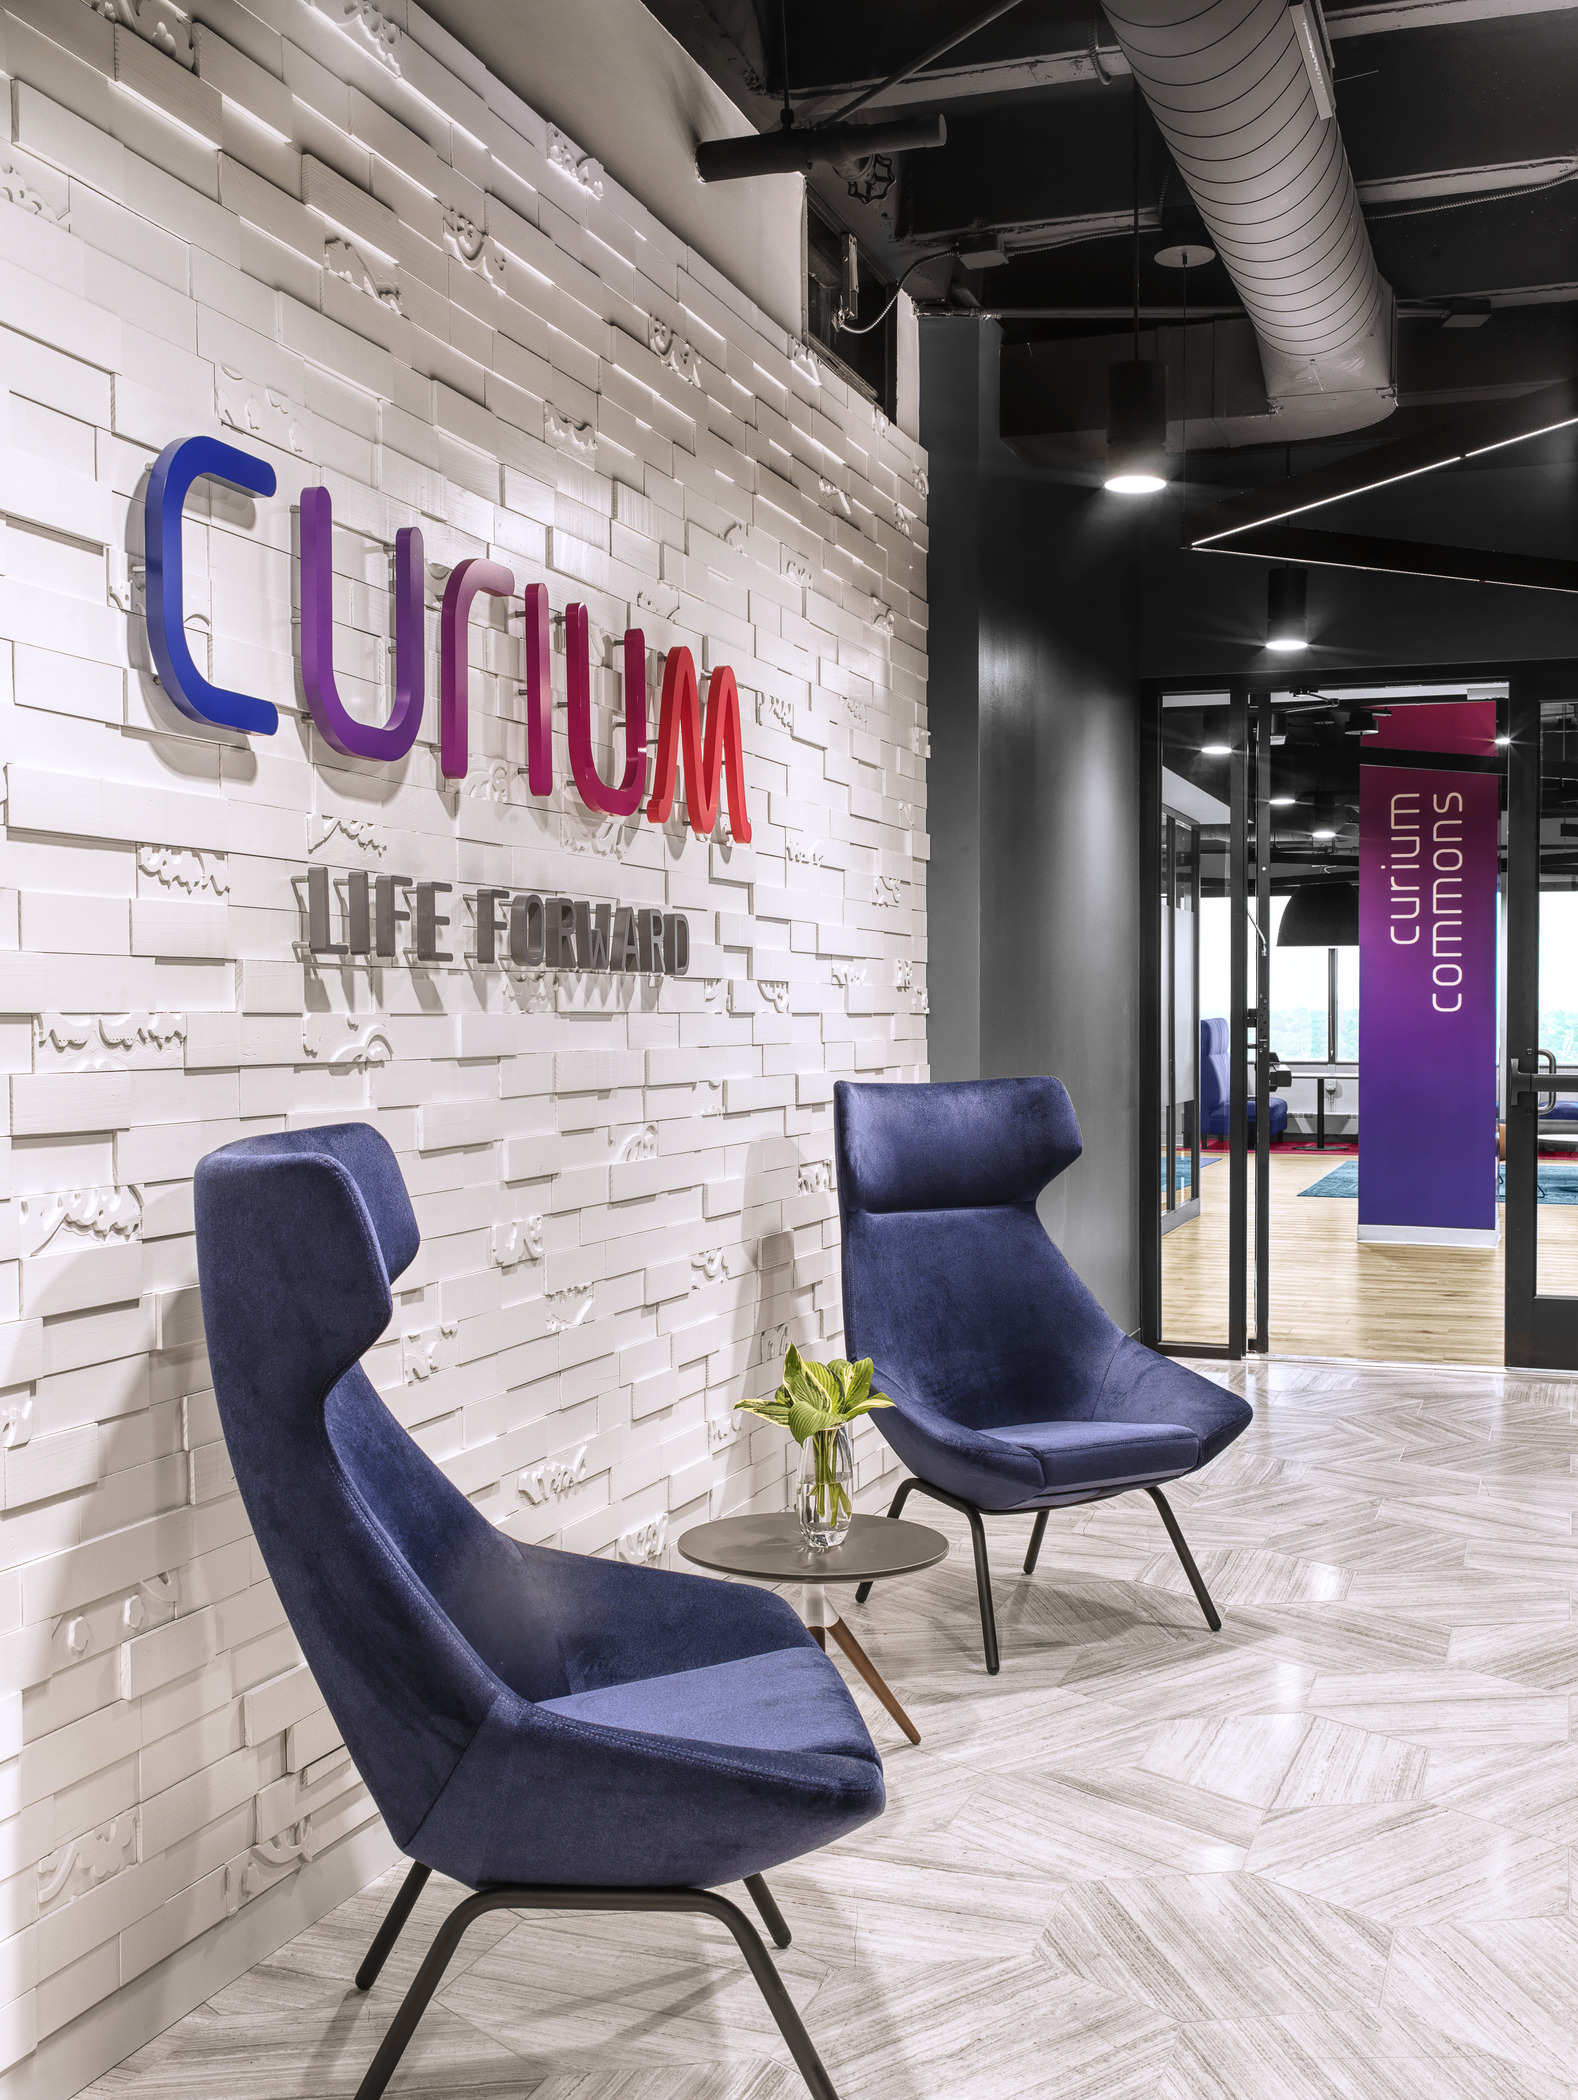 Two deep-set fabric chairs sit in a bright, clean lobby area. On the wall behind them, text reads "Curium. Life Forward." A doorway to the left leads to an open working space, with the text "Curium Commons" printed on a painted support beam matched to the Curium colors.